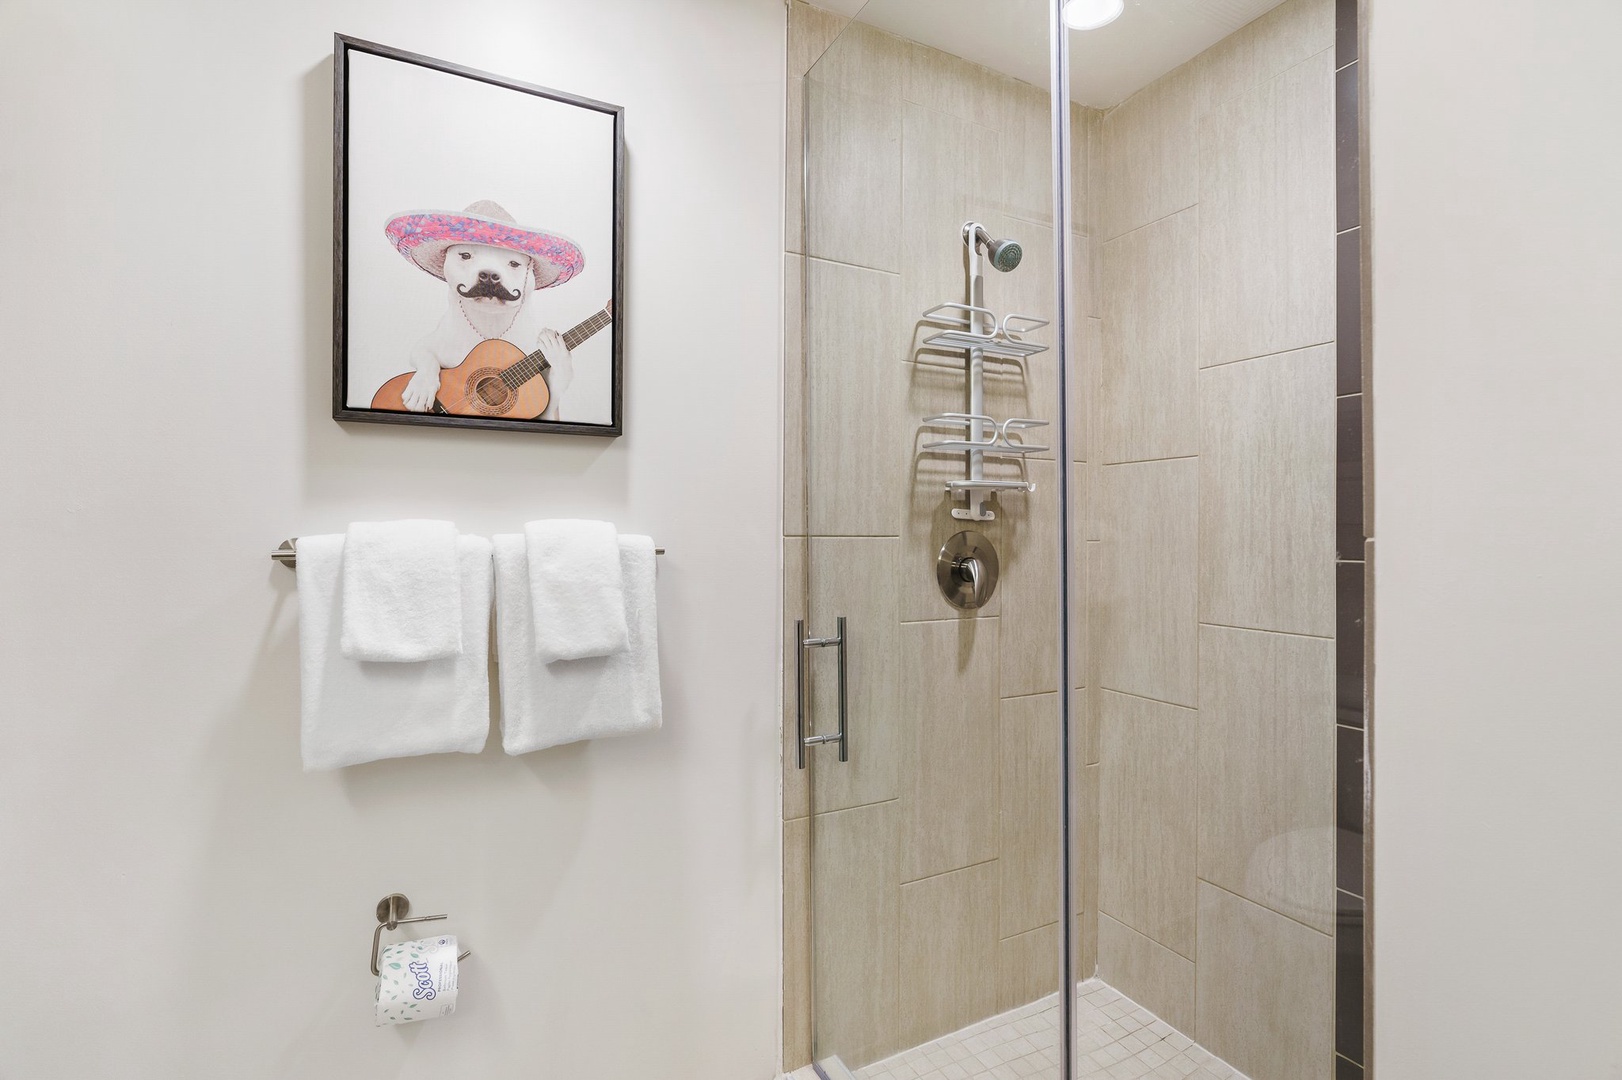 Get ready to conquer the day in the contemporary walk-in shower with stylish fixtures.